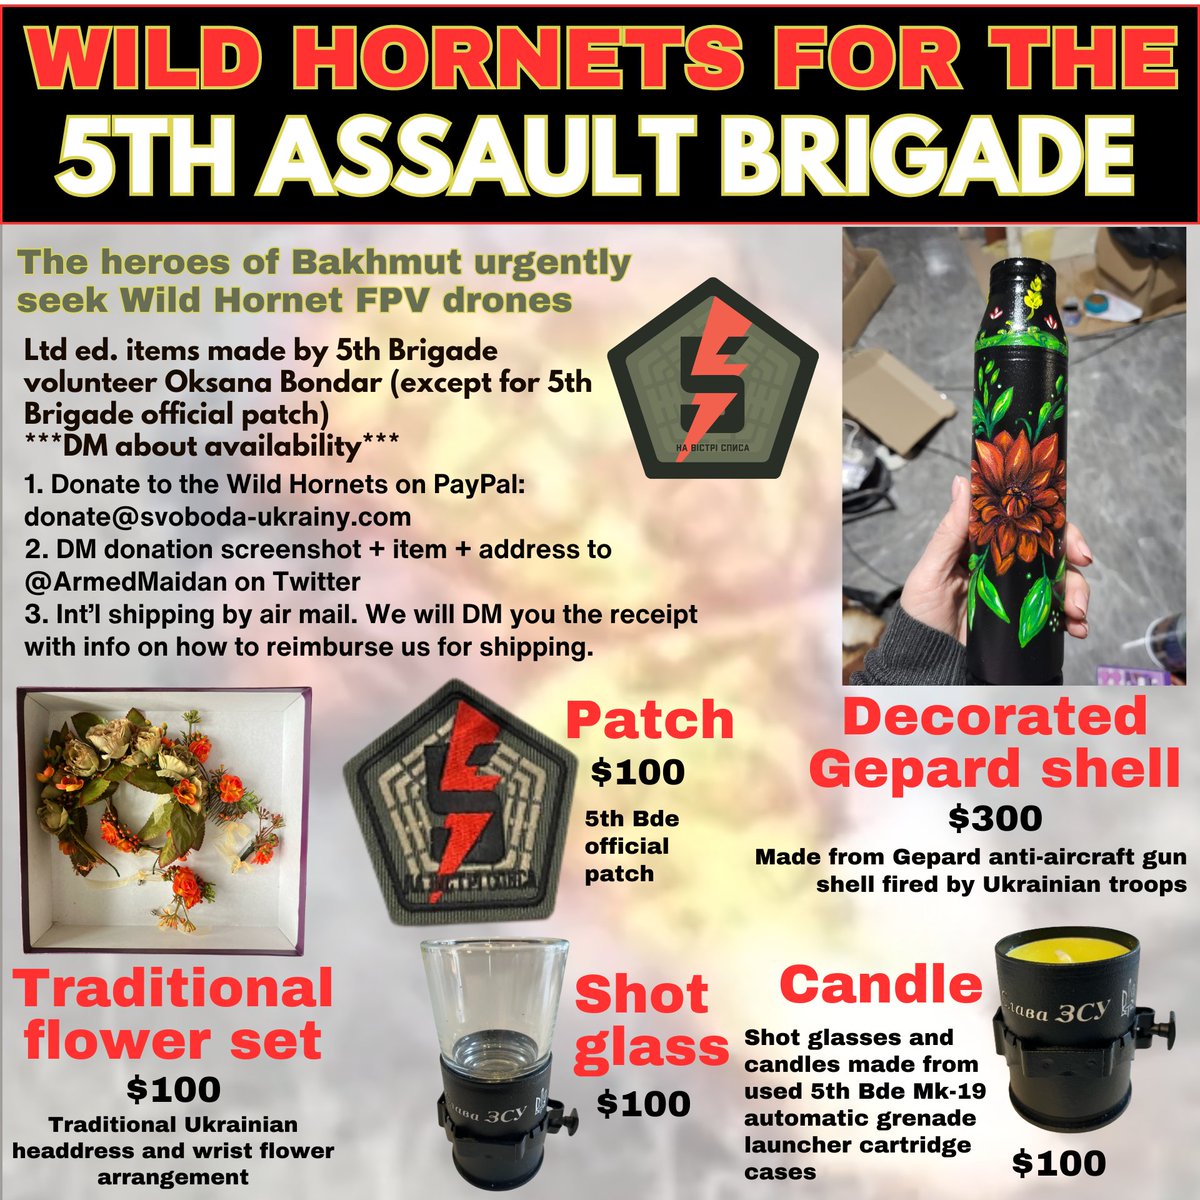 The 5th Assault Brigade urgently calls for @wilendhornets FPV drones⚡ The heroes of Bakhmut send thanks for donations for truck repairs❣ They now need Wild Hornets Donate $100+ to get merch👇 *DM about availability* 👉Donate to Wild Hornets on PayPal: donate@svoboda-ukrainy.com…